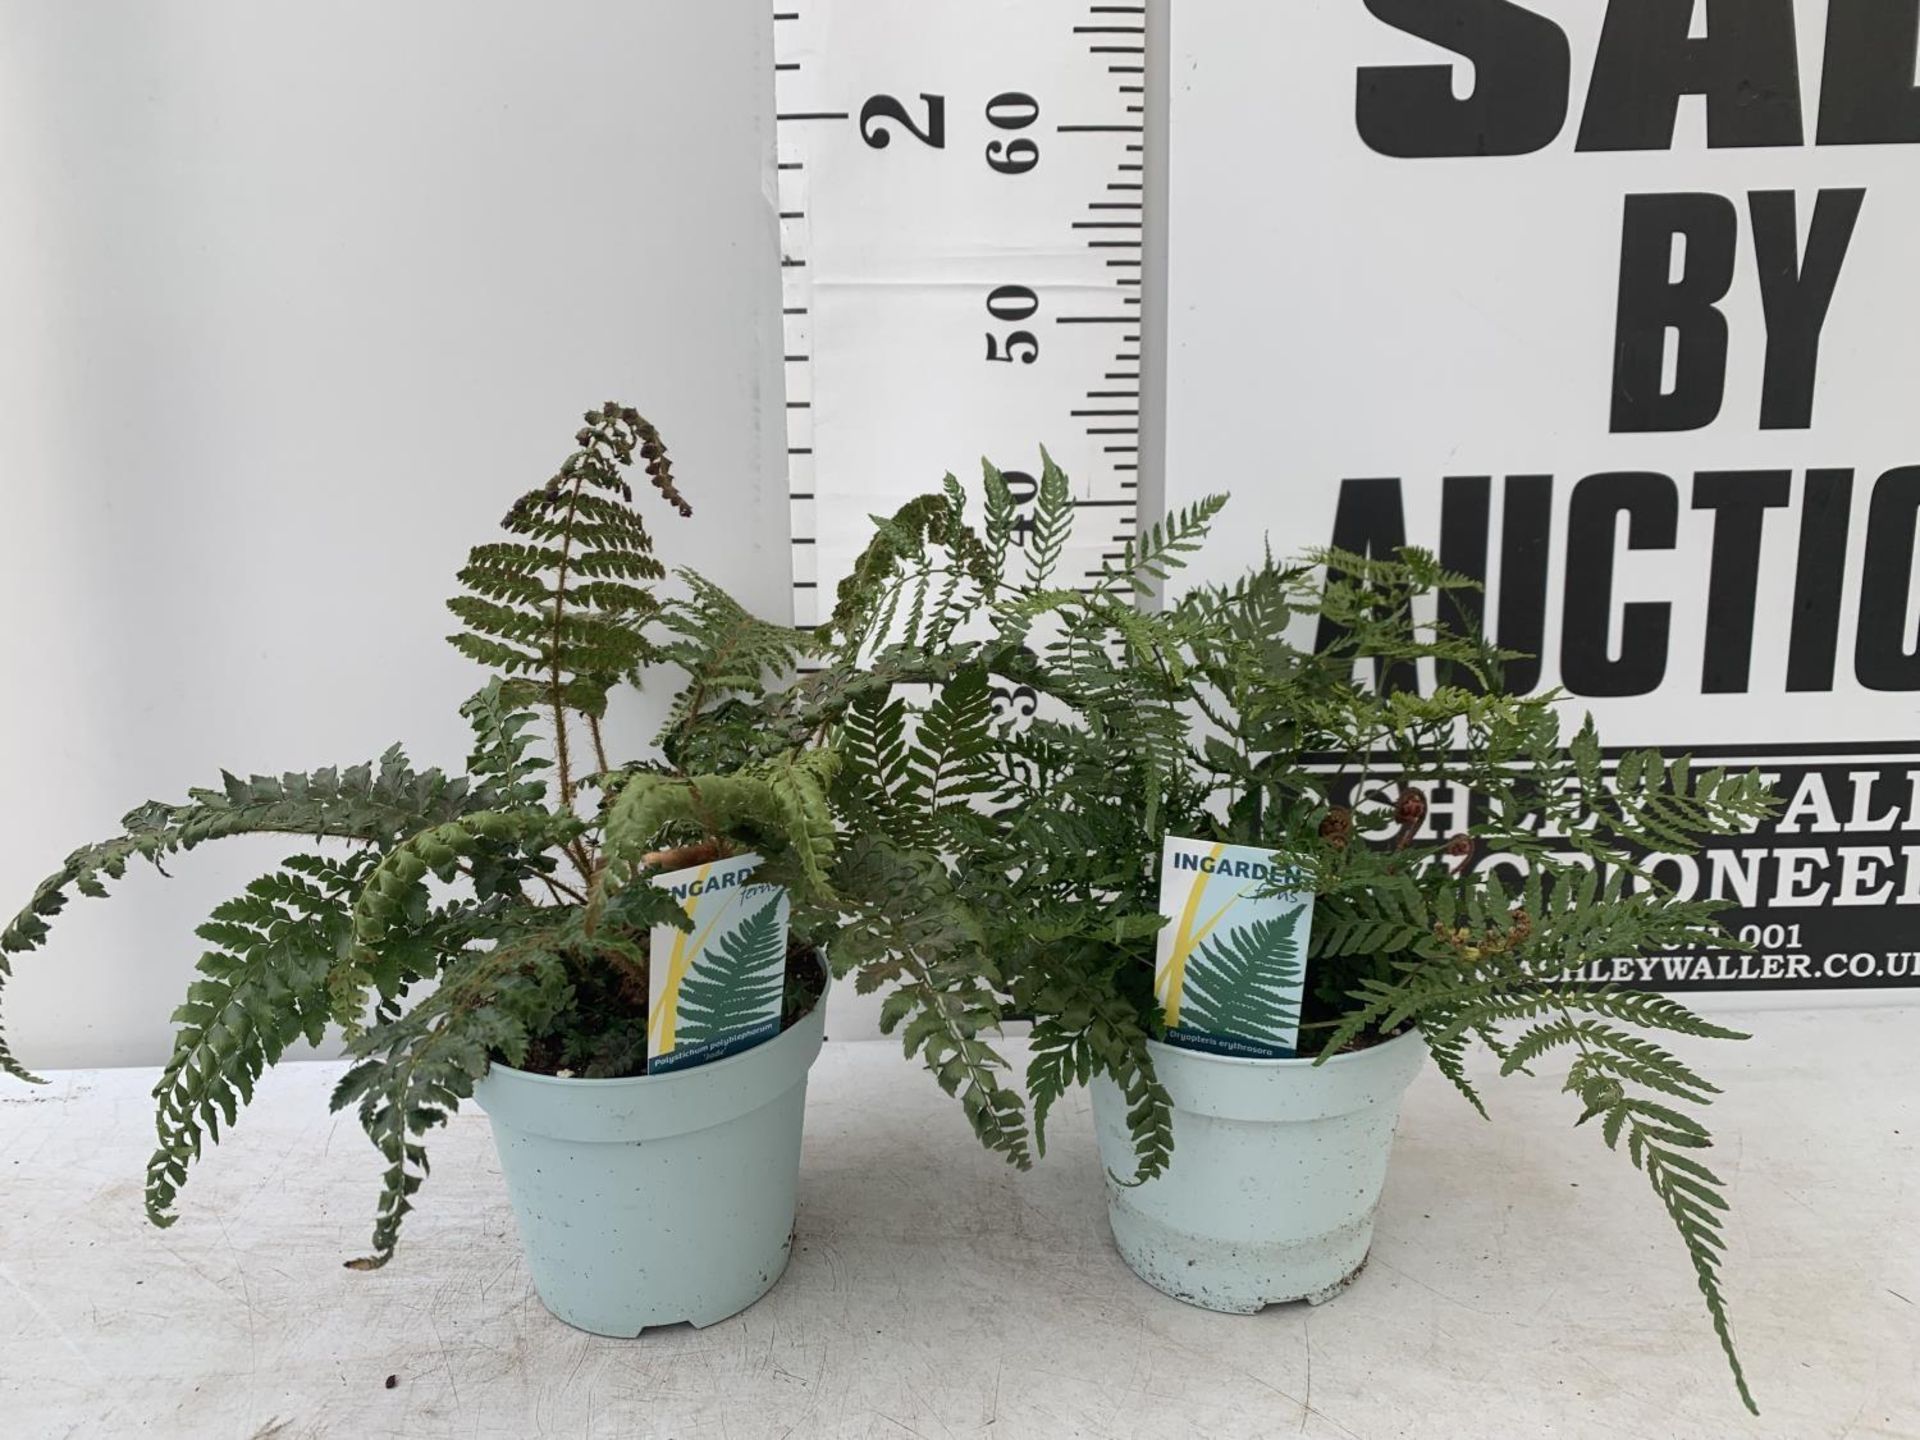 TWO FERNS 'DRYOPTERIS ERYTHROSORA' AND 'POLYSTICHUM POLYBLEPHARUM JADE' IN 2 LTR POTS APPROX 40CM IN - Image 2 of 8